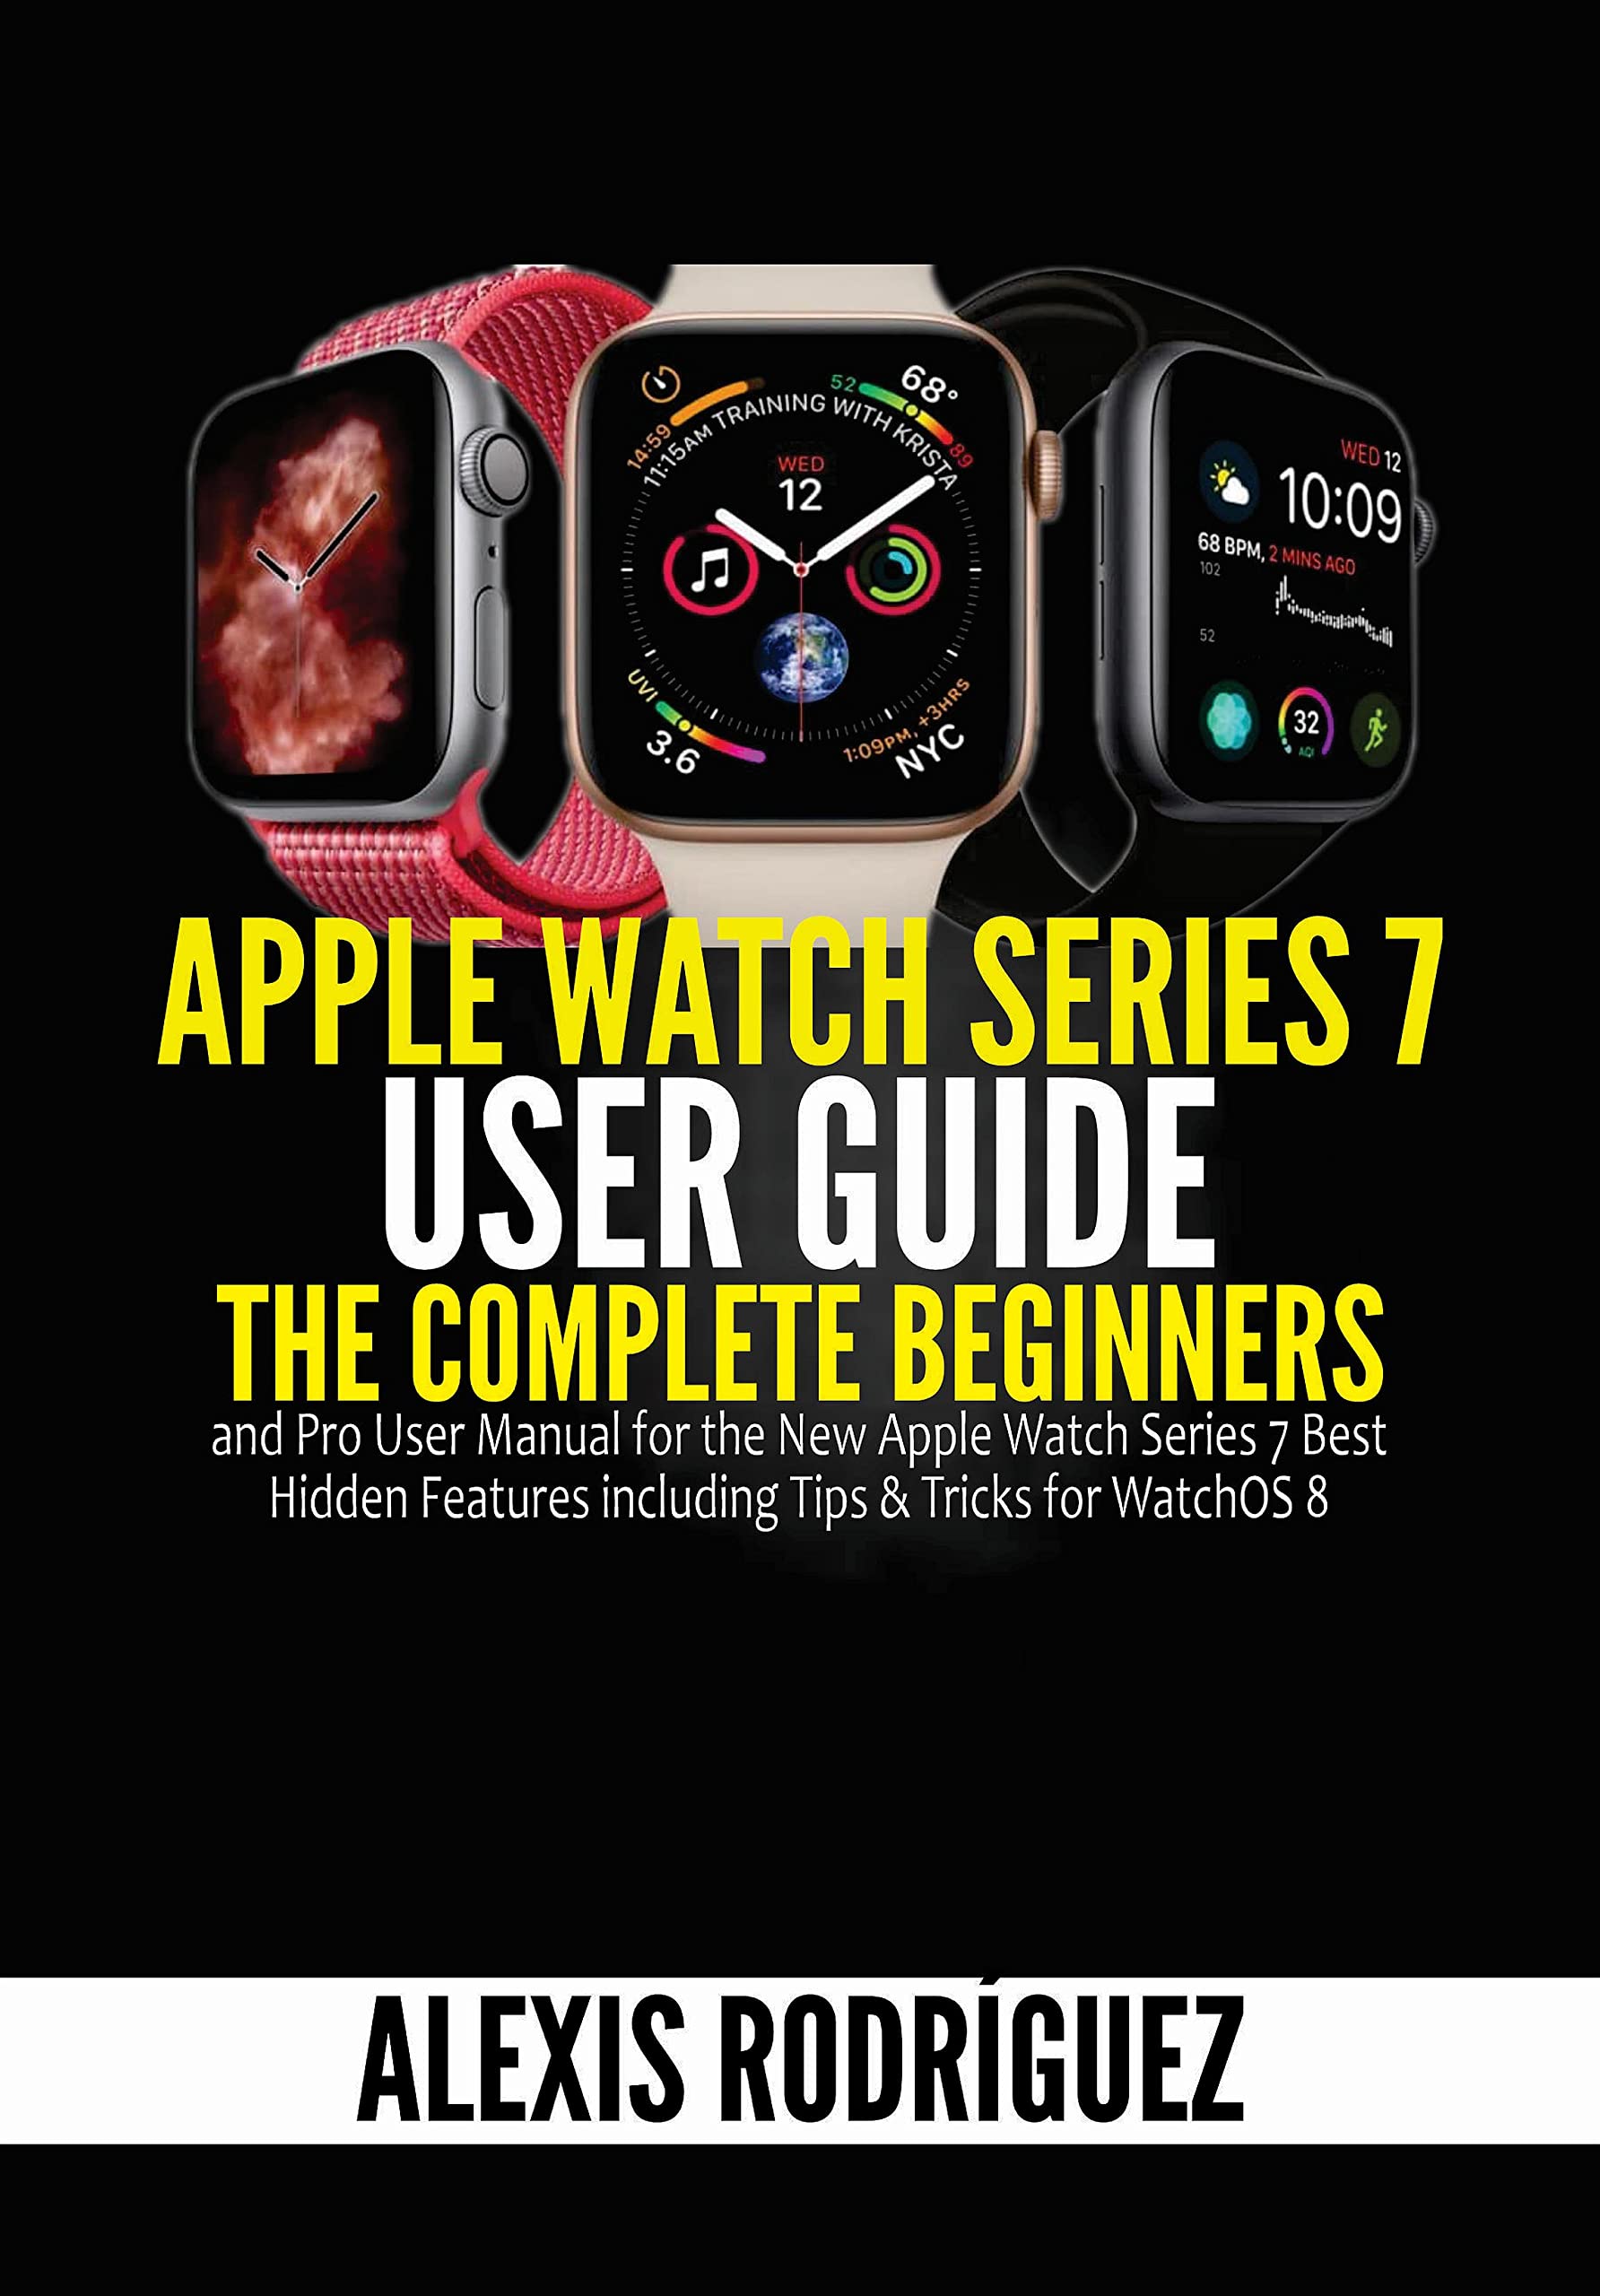 Apple Watch Series 7 User Guide: The Complete Beginners and Pro User Manual for the New Apple Watch Series 7 Best Hidden Features including Tips & Tricks for WatchOS 8